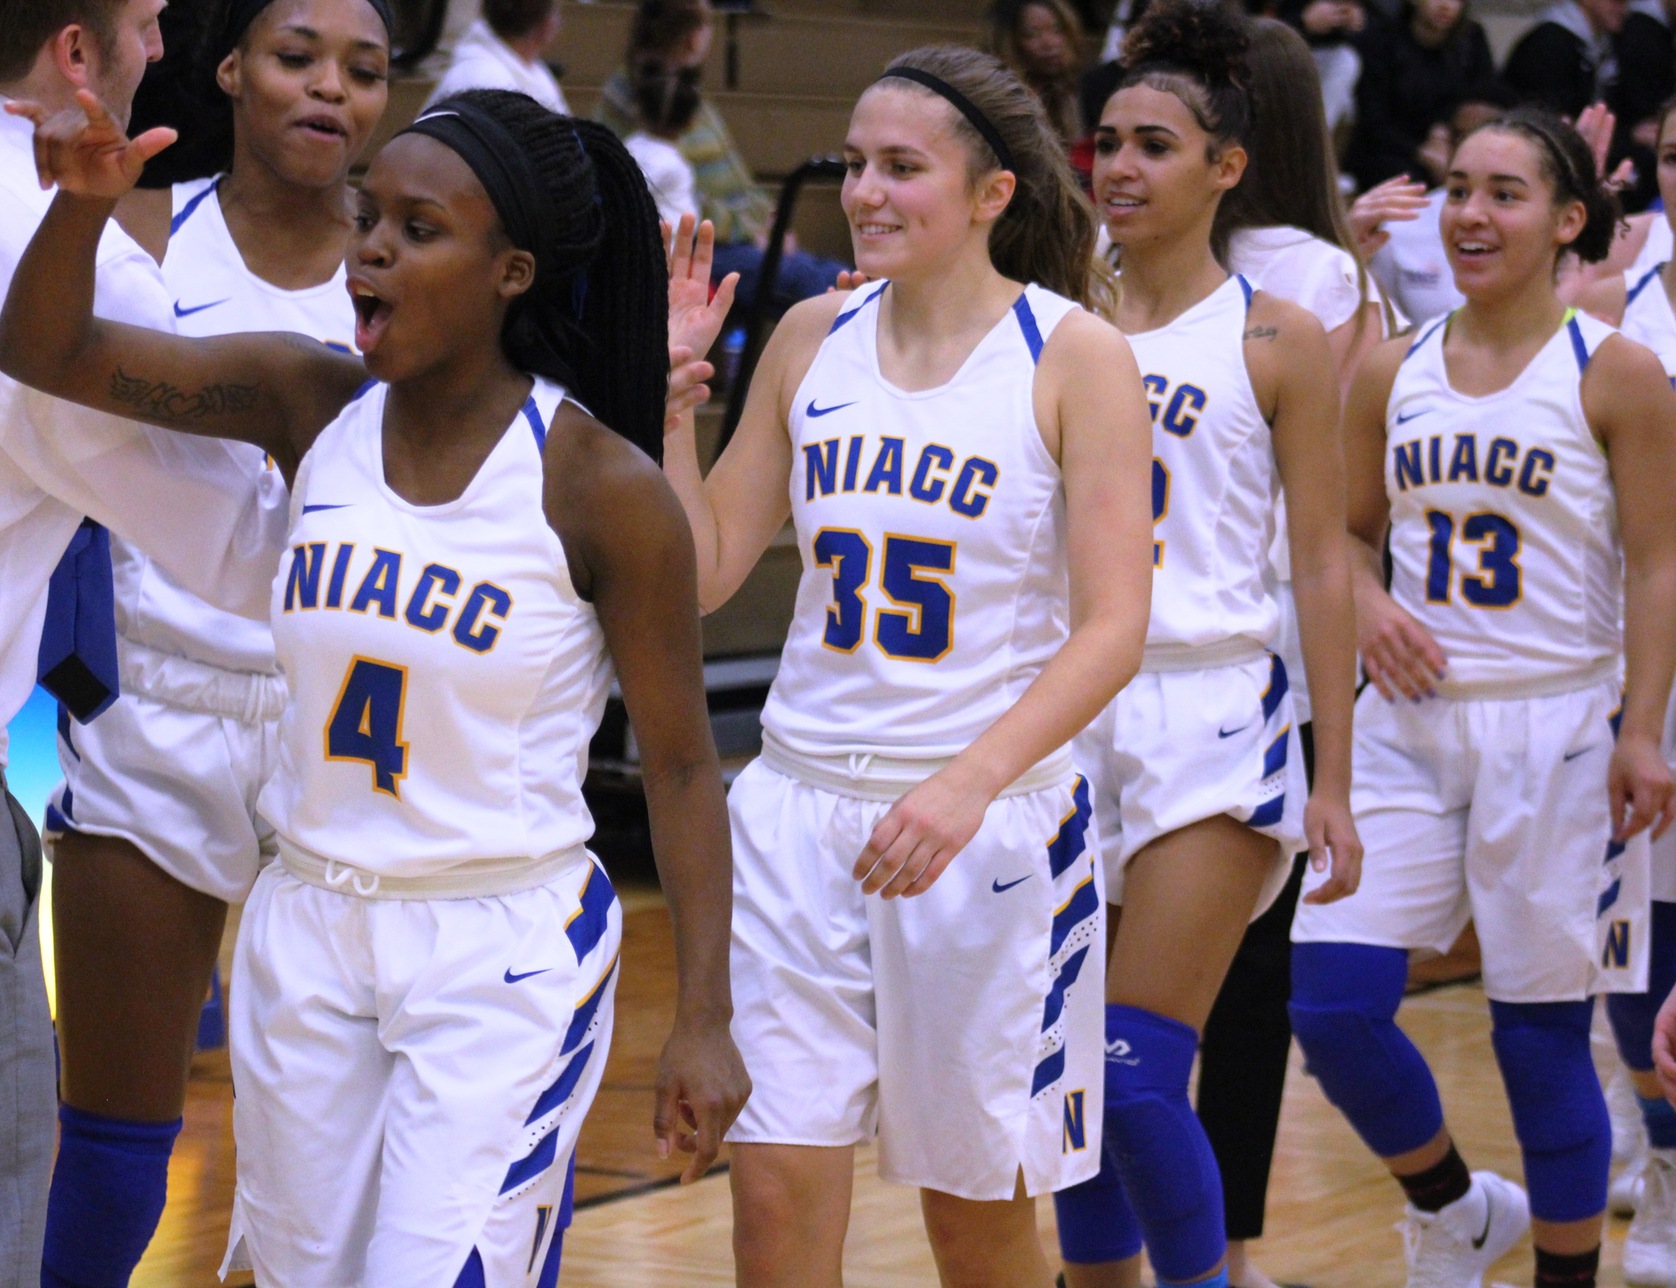 NIACC players are all smiles after Saturday's 98-89 win over Iowa Western in the NIACC gym.